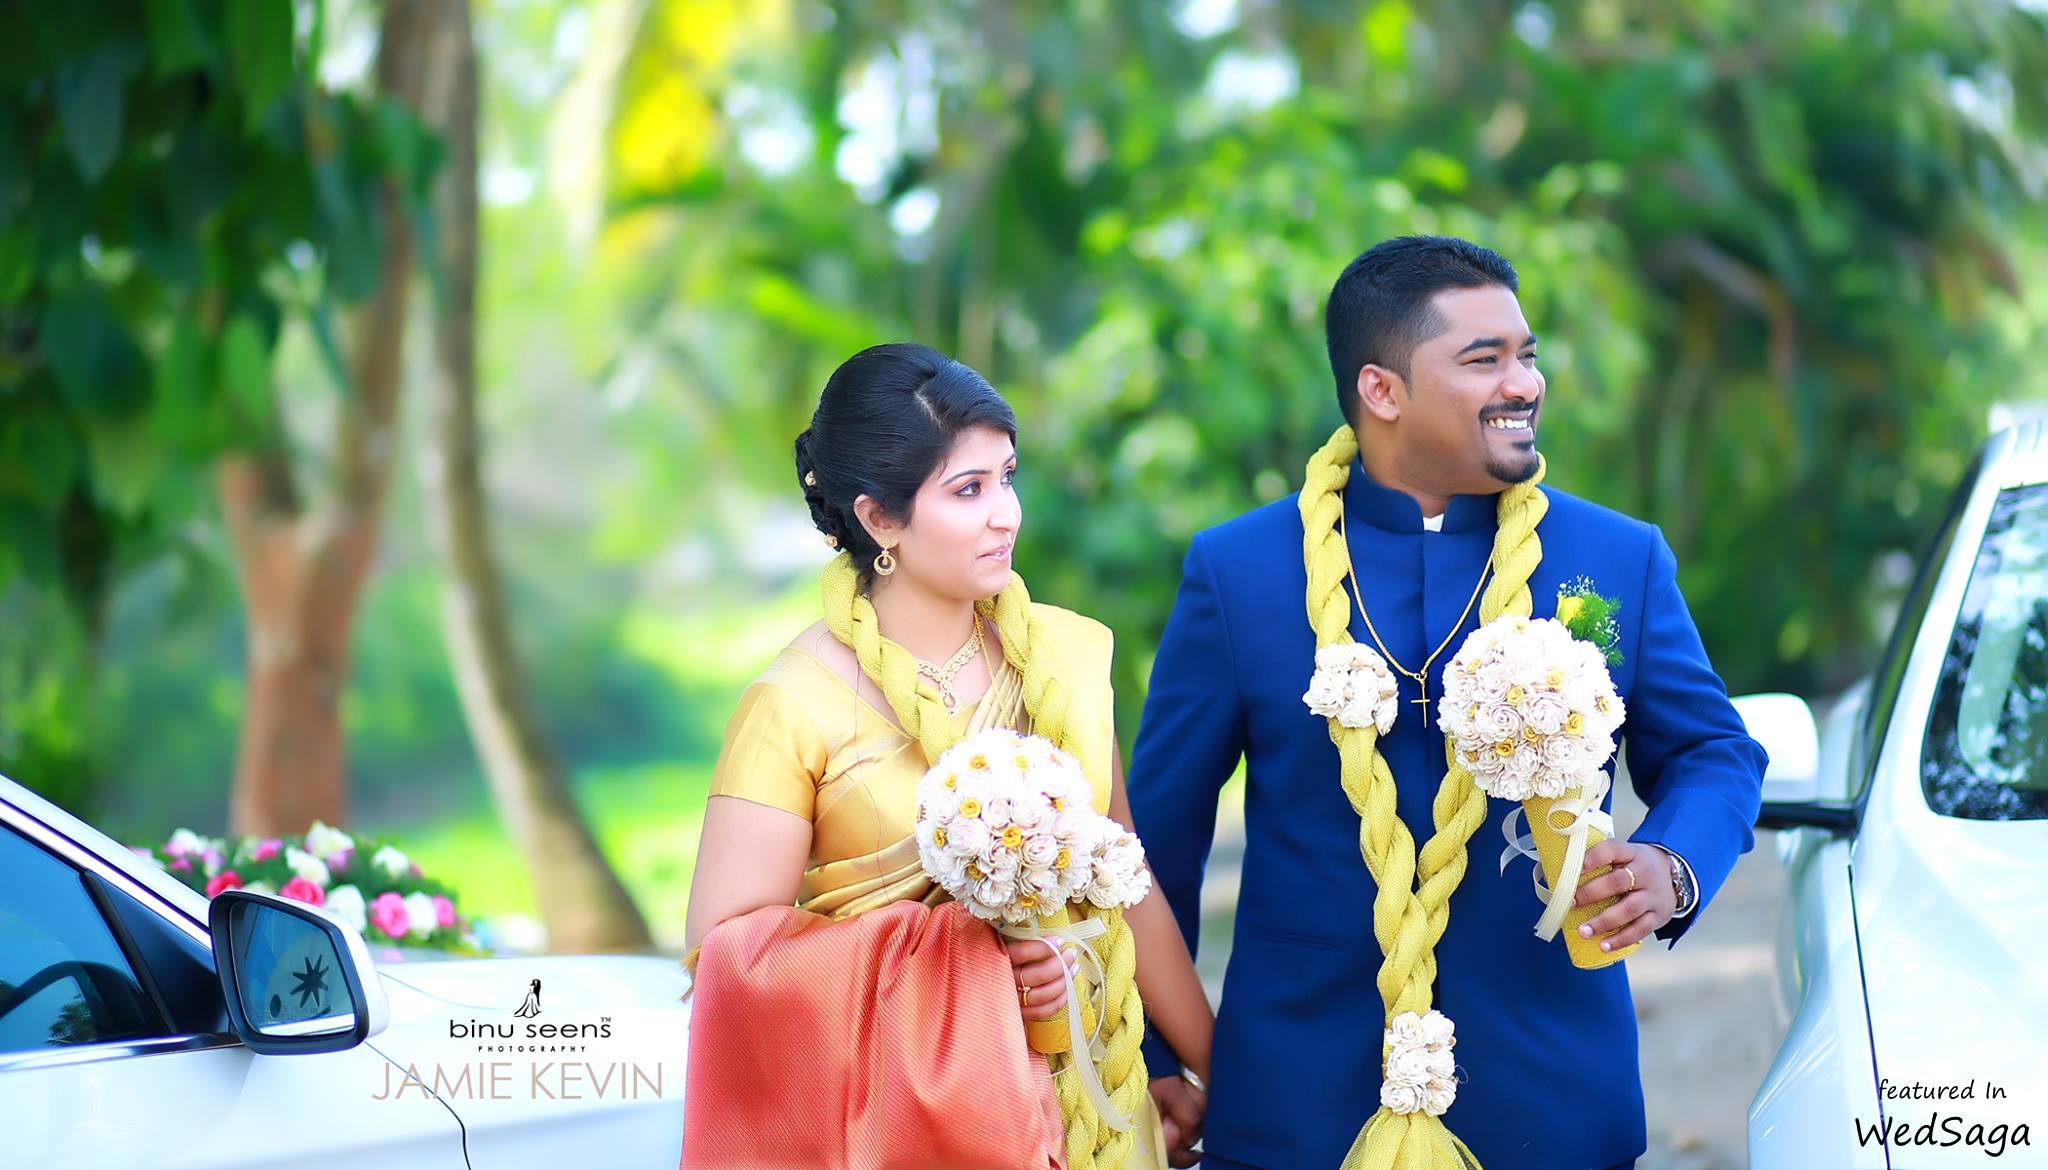 Exclusive yellow thread with white Rose wedding garland